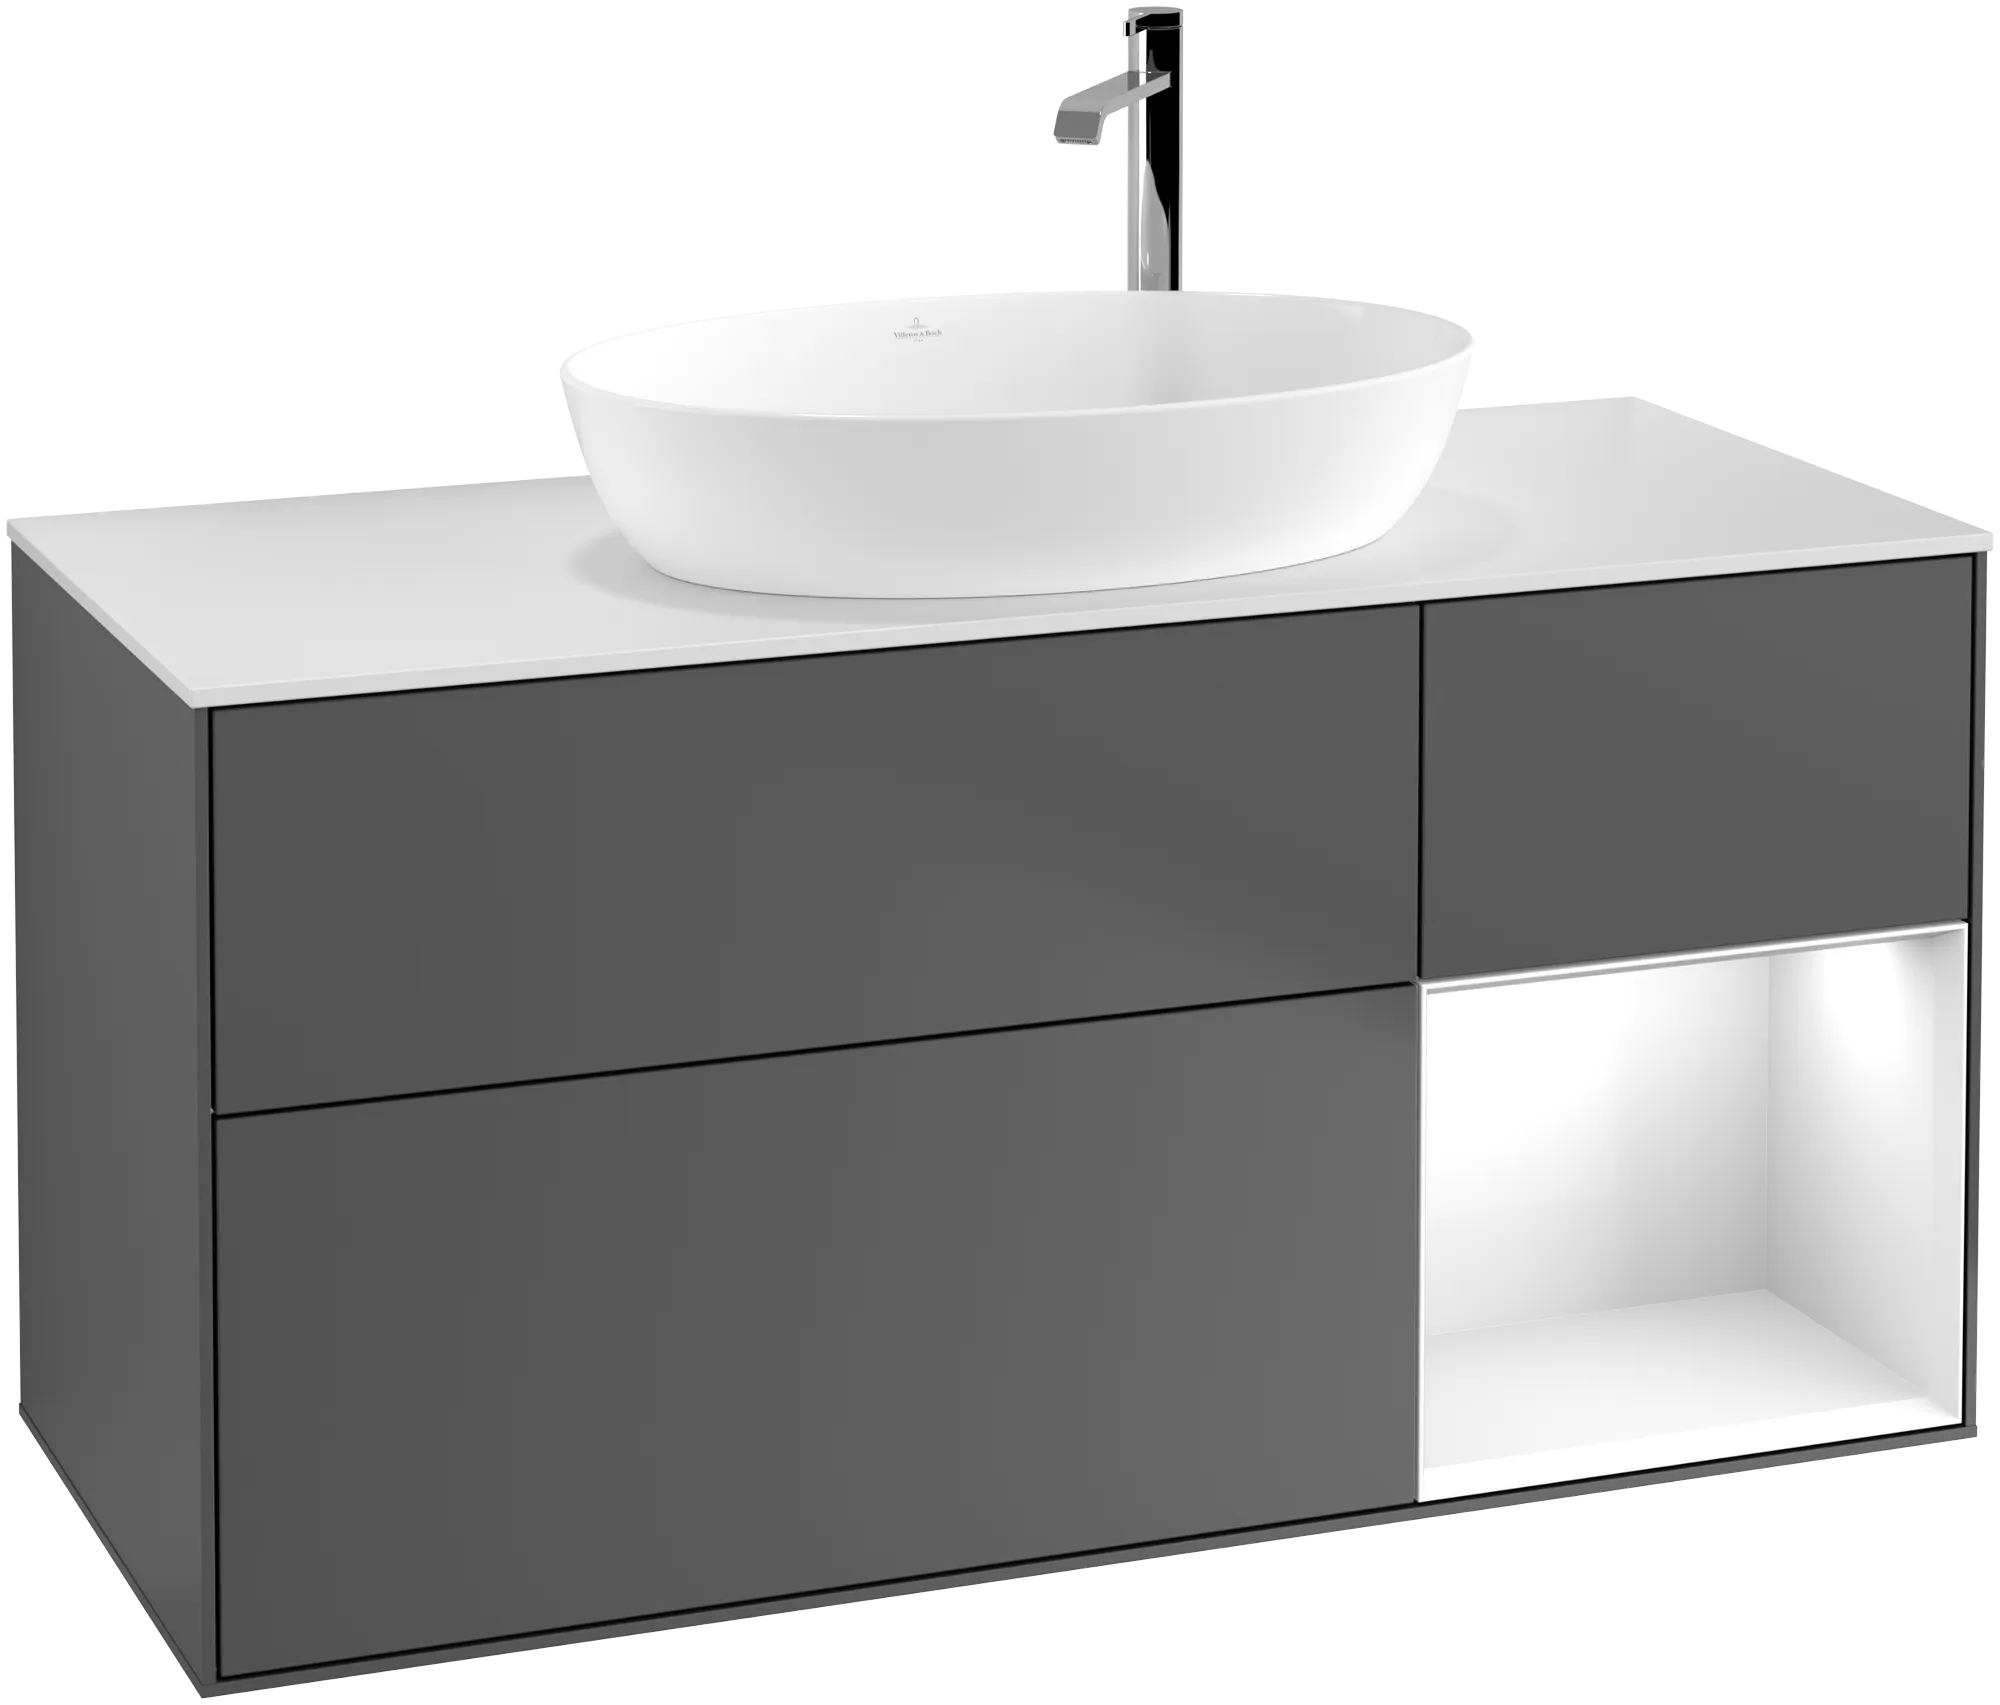 Picture of VILLEROY BOCH Finion Vanity unit, with lighting, 3 pull-out compartments, 1200 x 603 x 501 mm, Anthracite Matt Lacquer / Glossy White Lacquer / Glass White Matt #G951GFGK